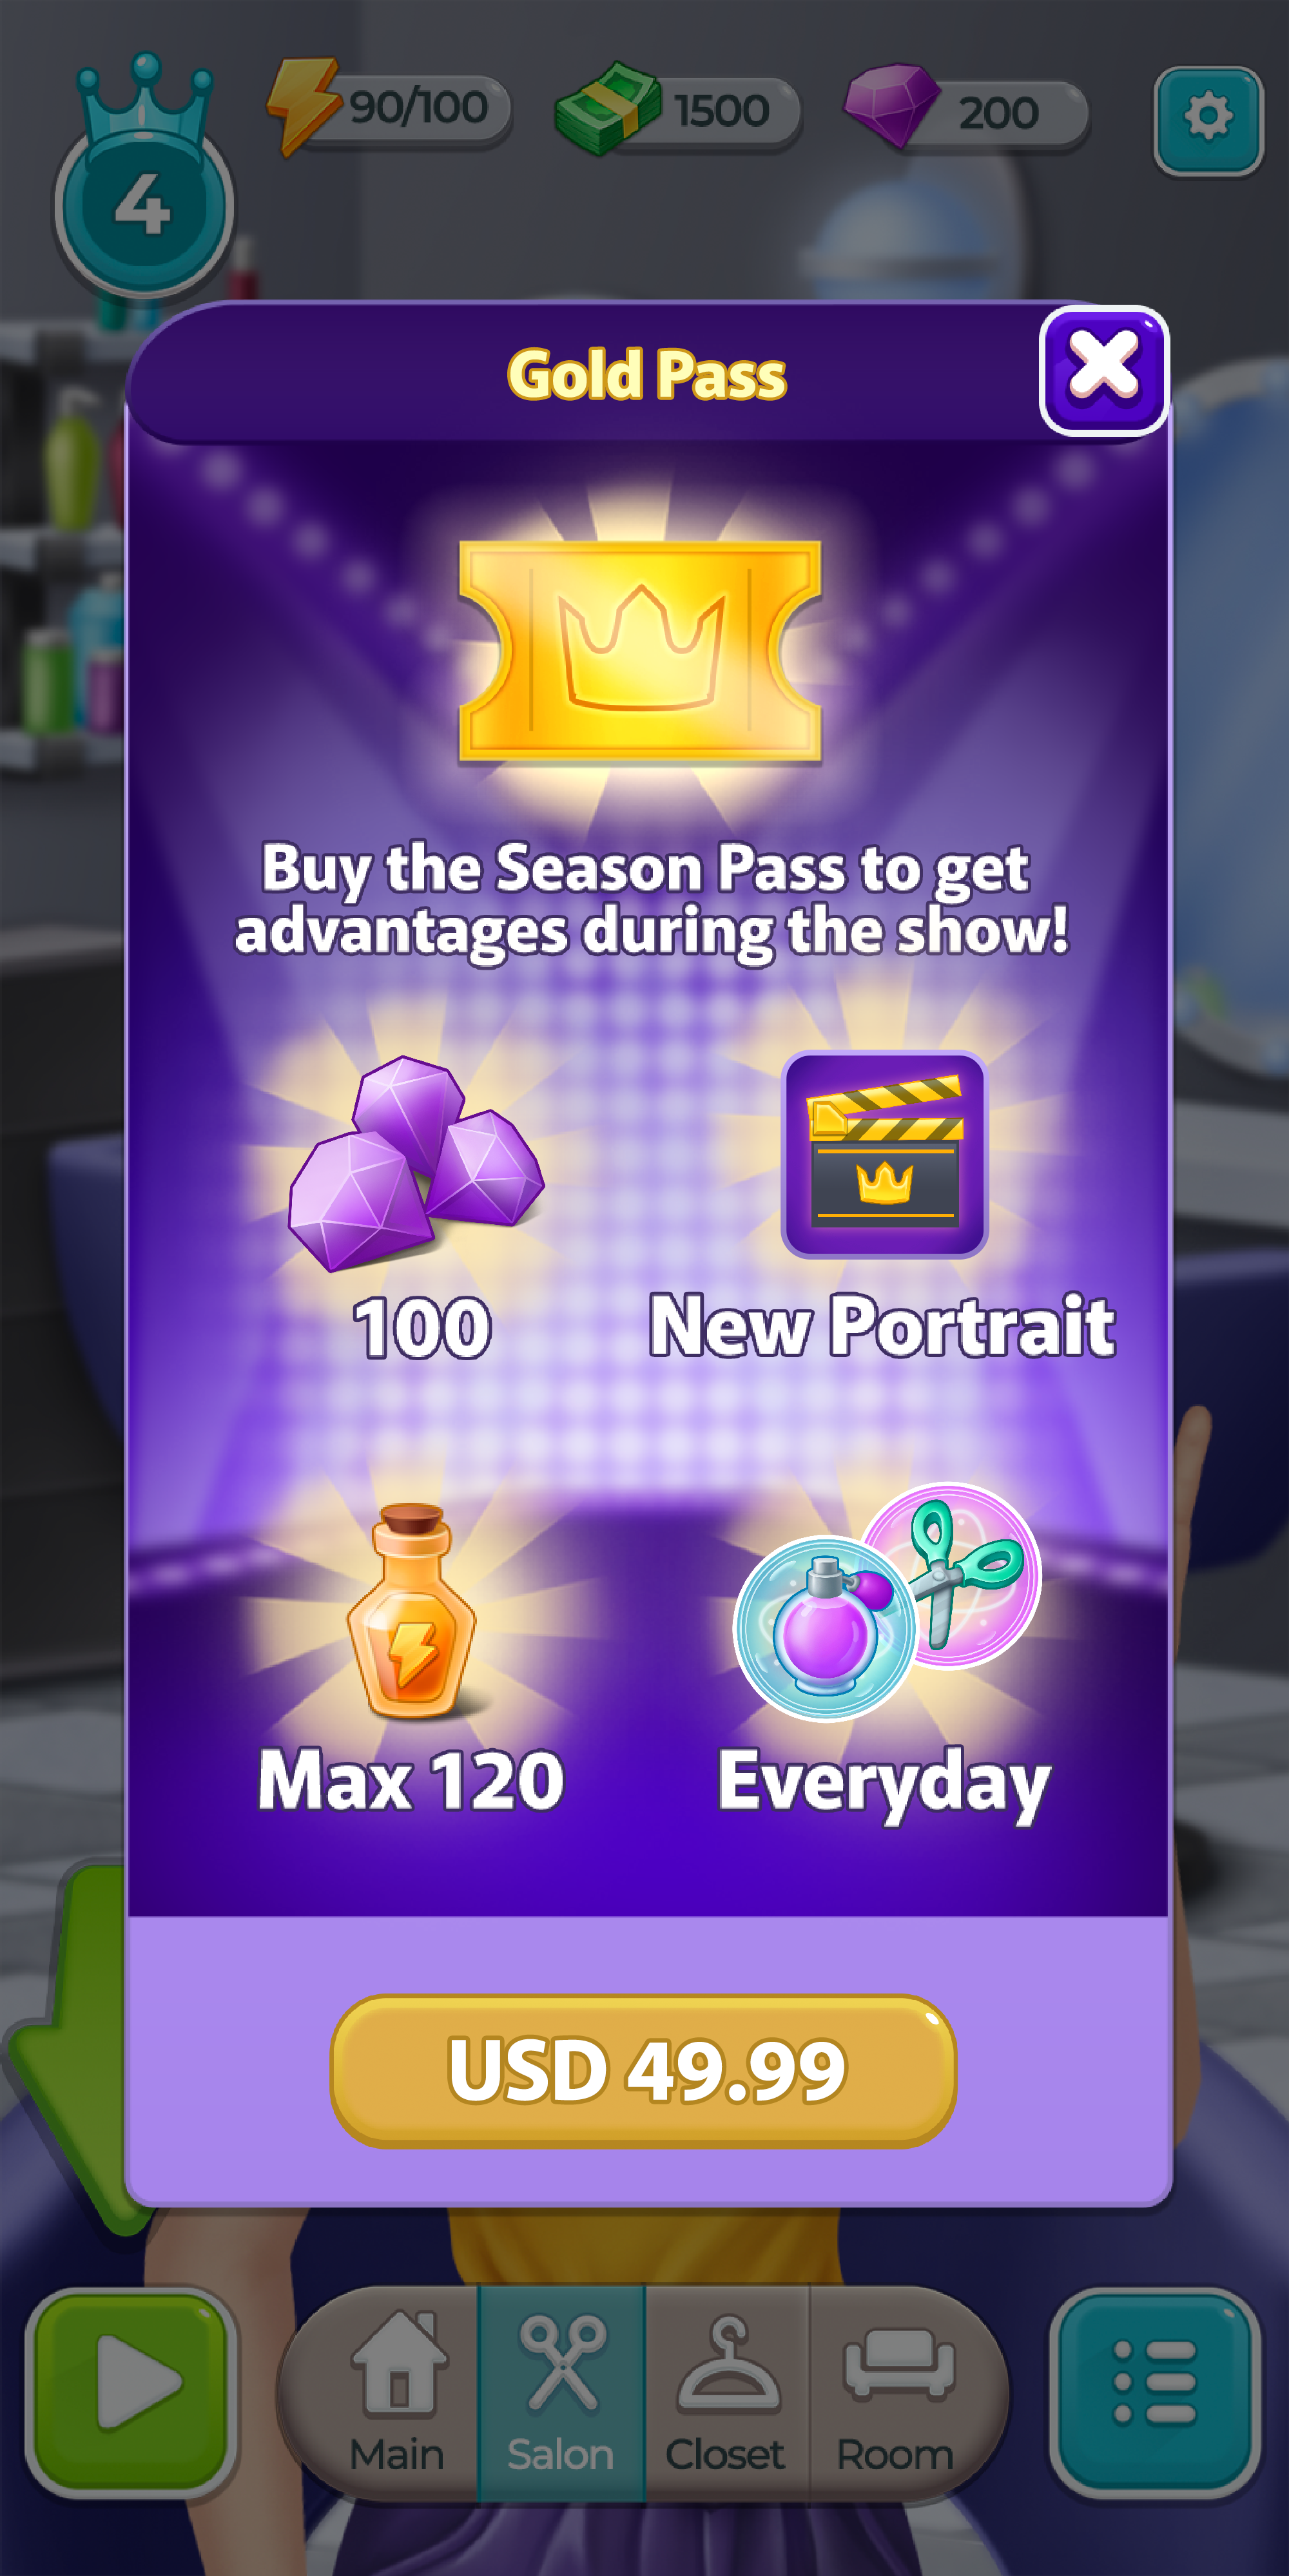 Battle Pass is a hot trend in mobile games